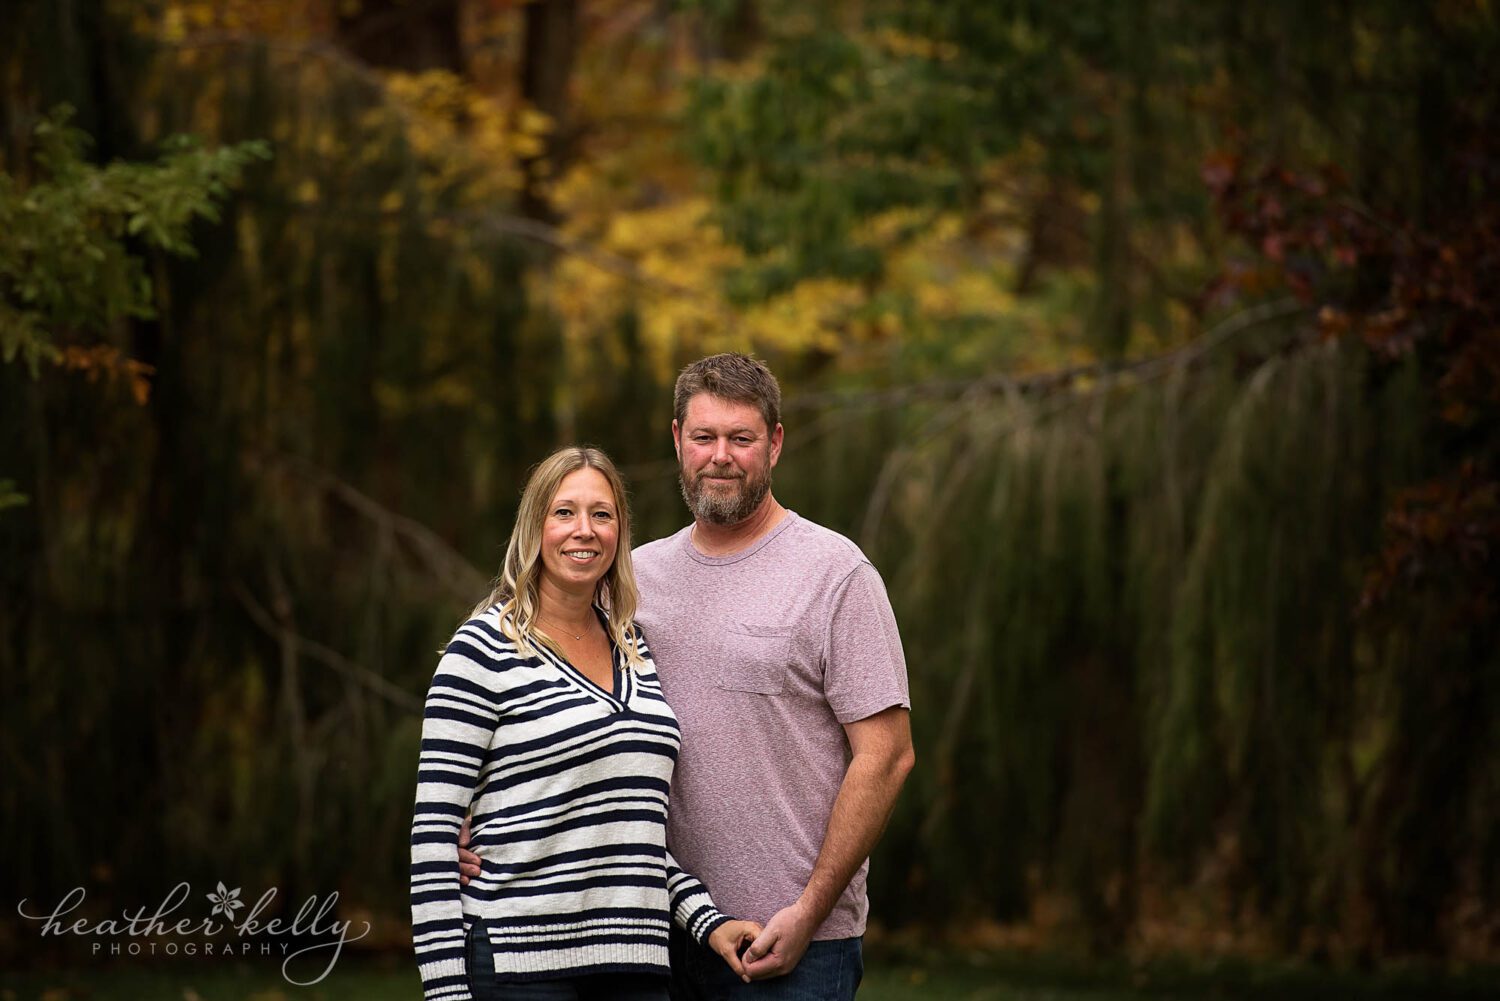 A newtown couple looking and laughing together during a couples photography session. 